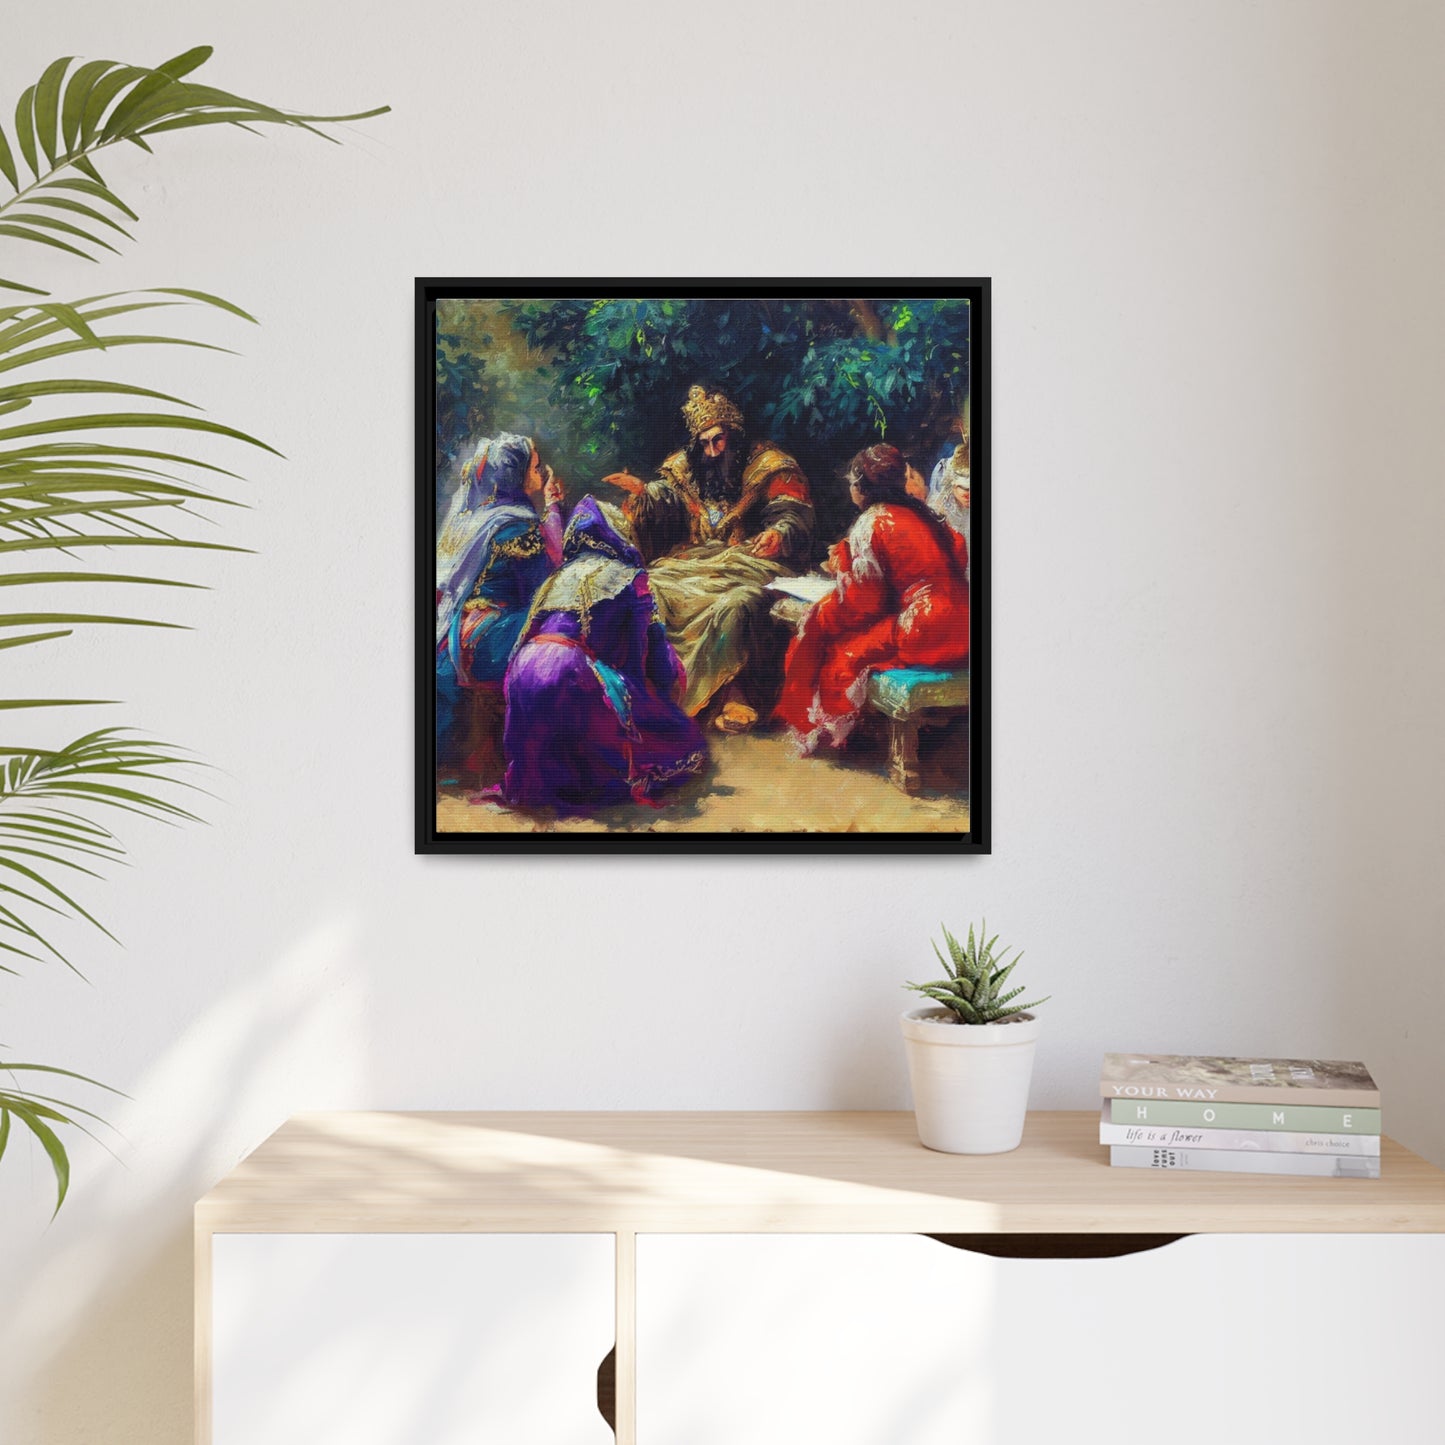 Matte Canvas, Black Frame - King Saul and the Witches of Endor